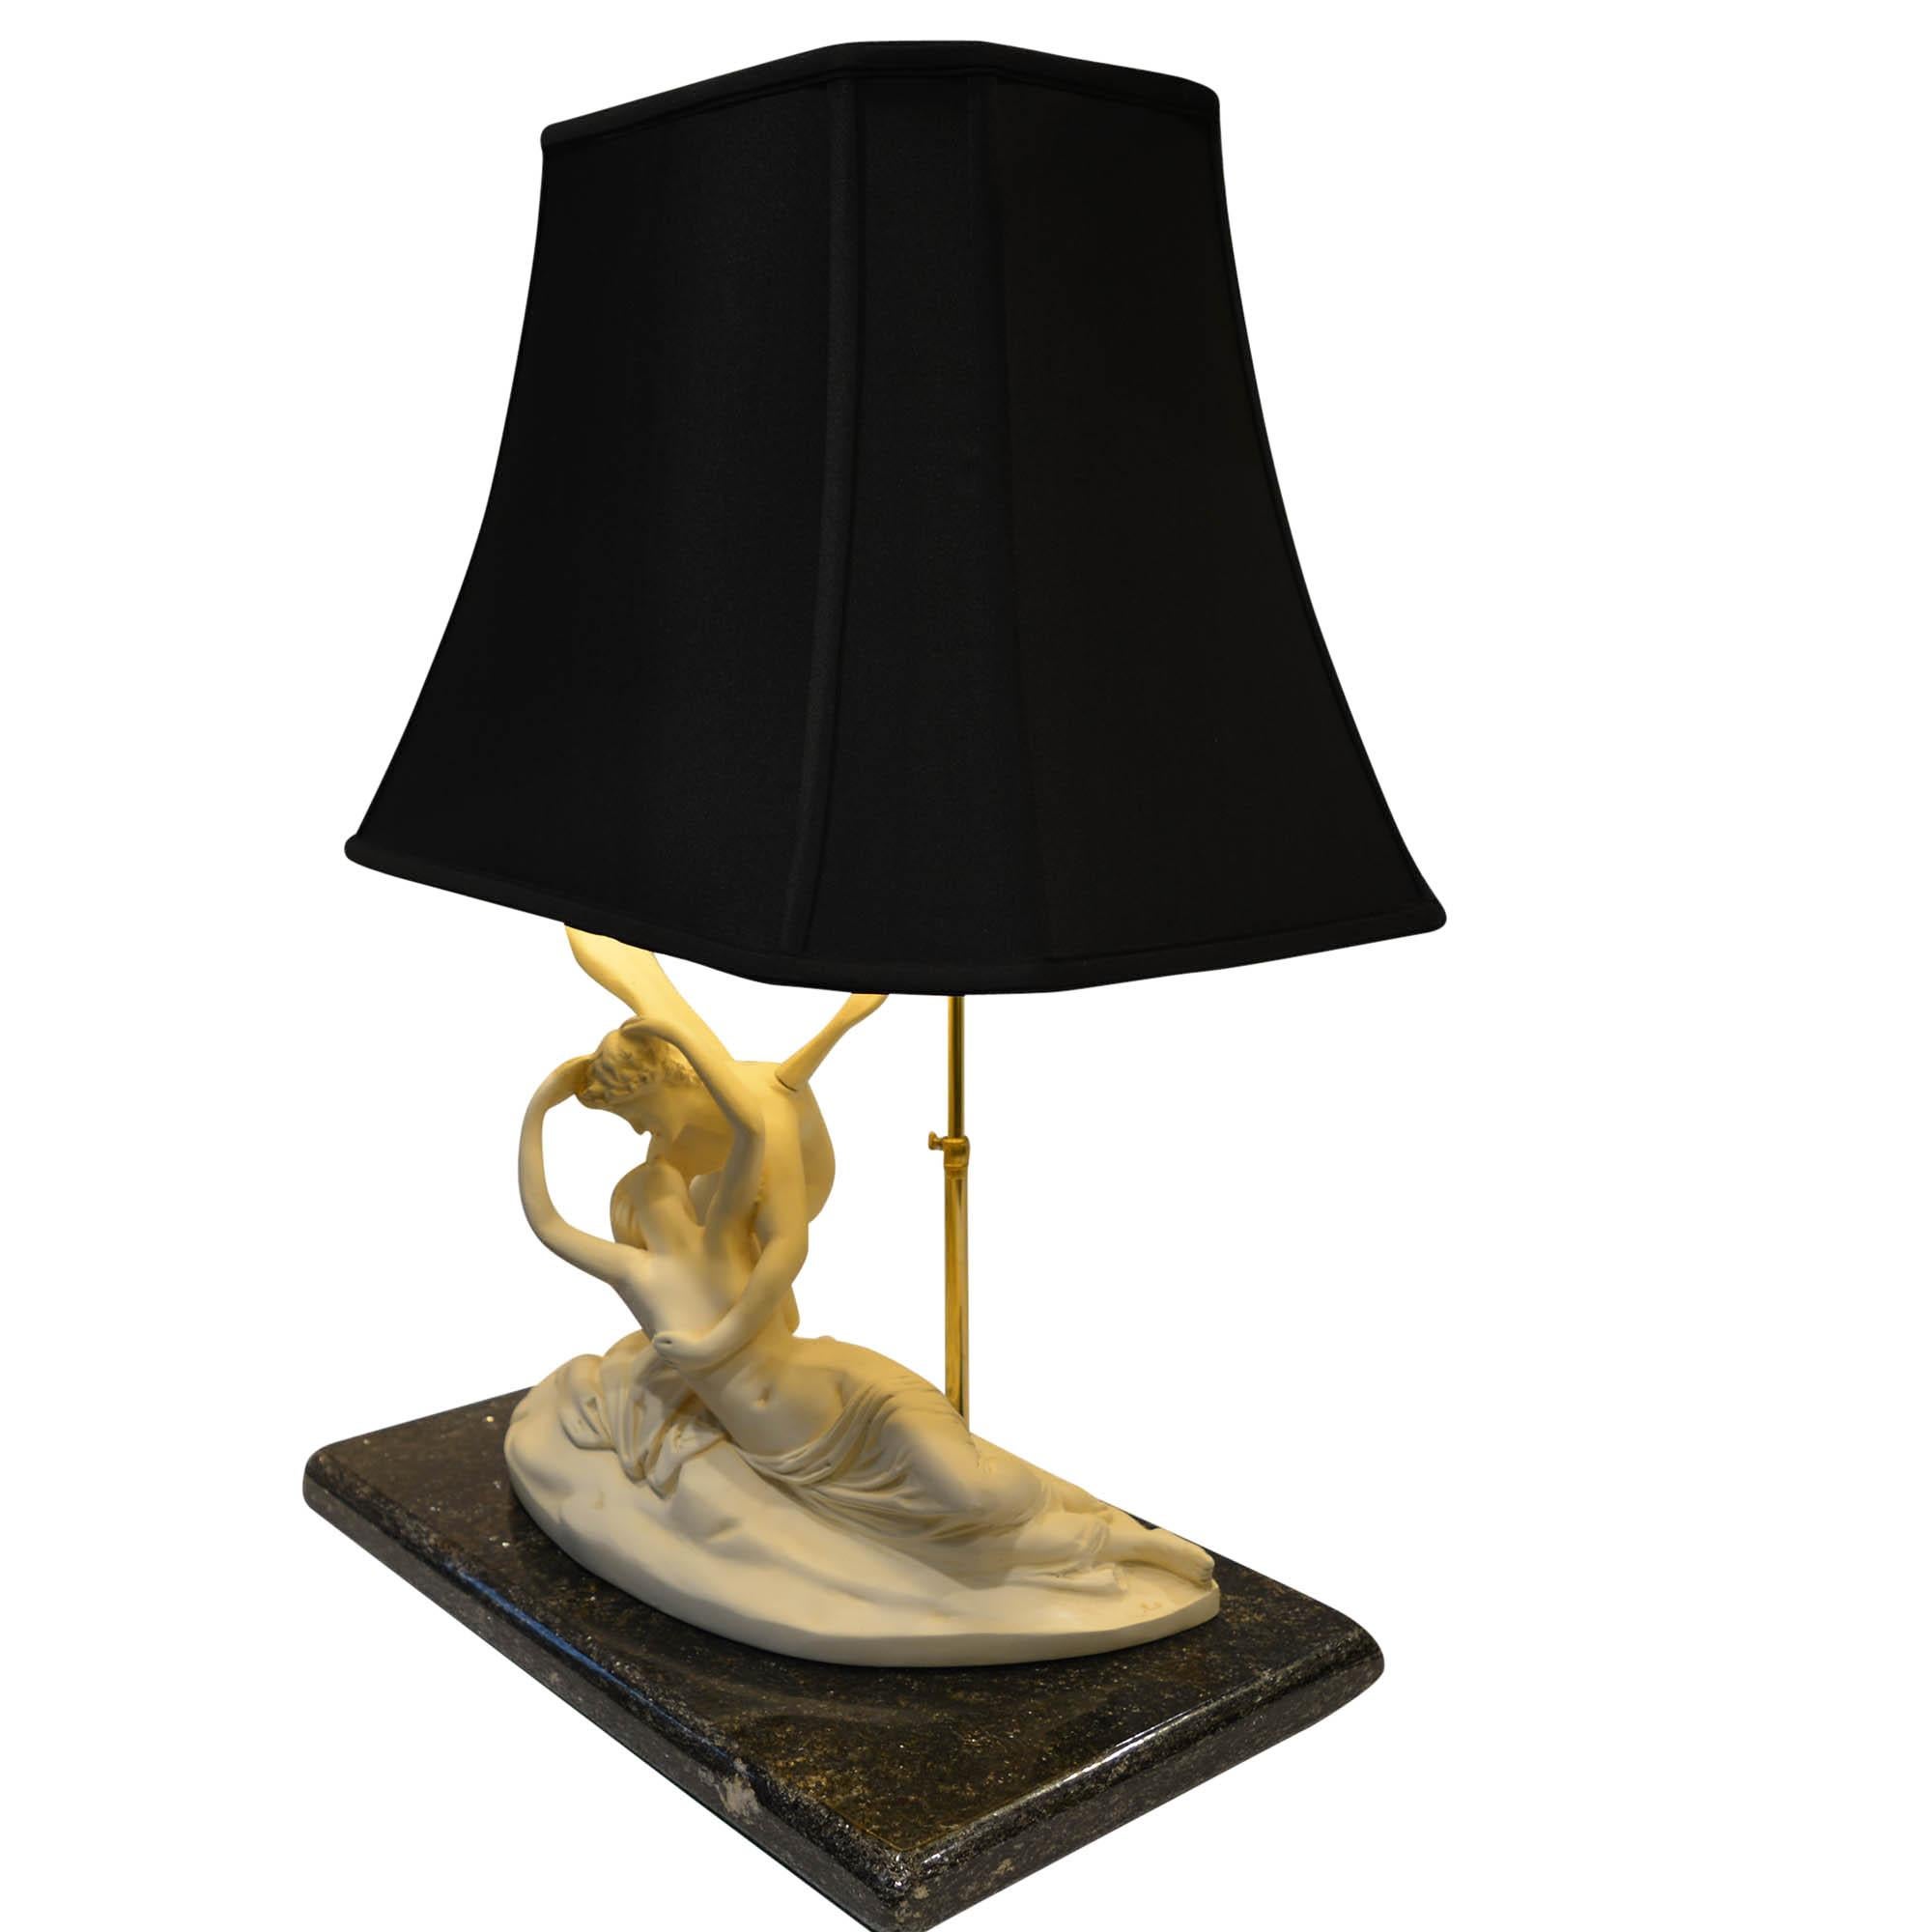 Silk Psyche Revived by Cupid's Kiss Lamp on Marble Base Black Shade Gold Lining